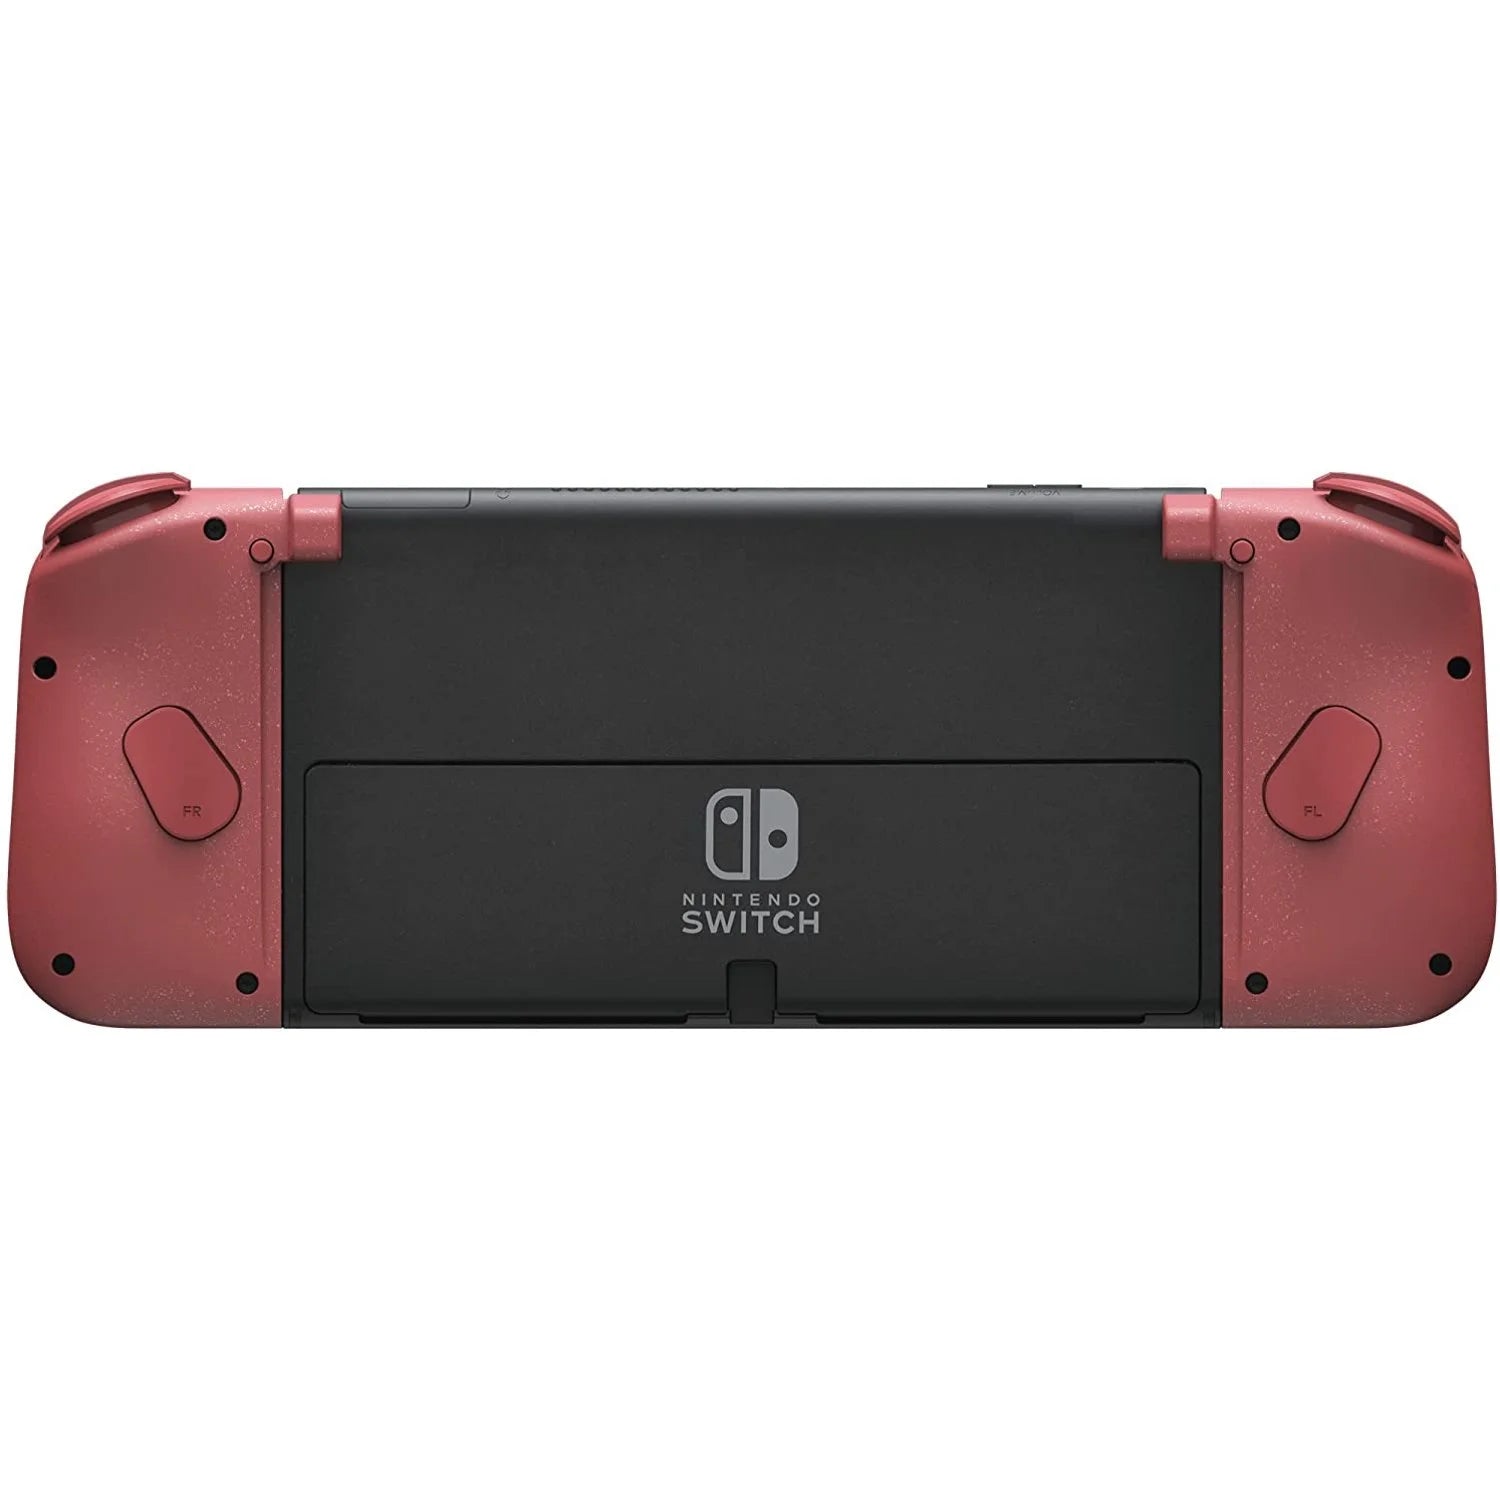 HORI Split Pad Compact for Nintendo Switch/OLED (Apricot Red) (NSW-398)